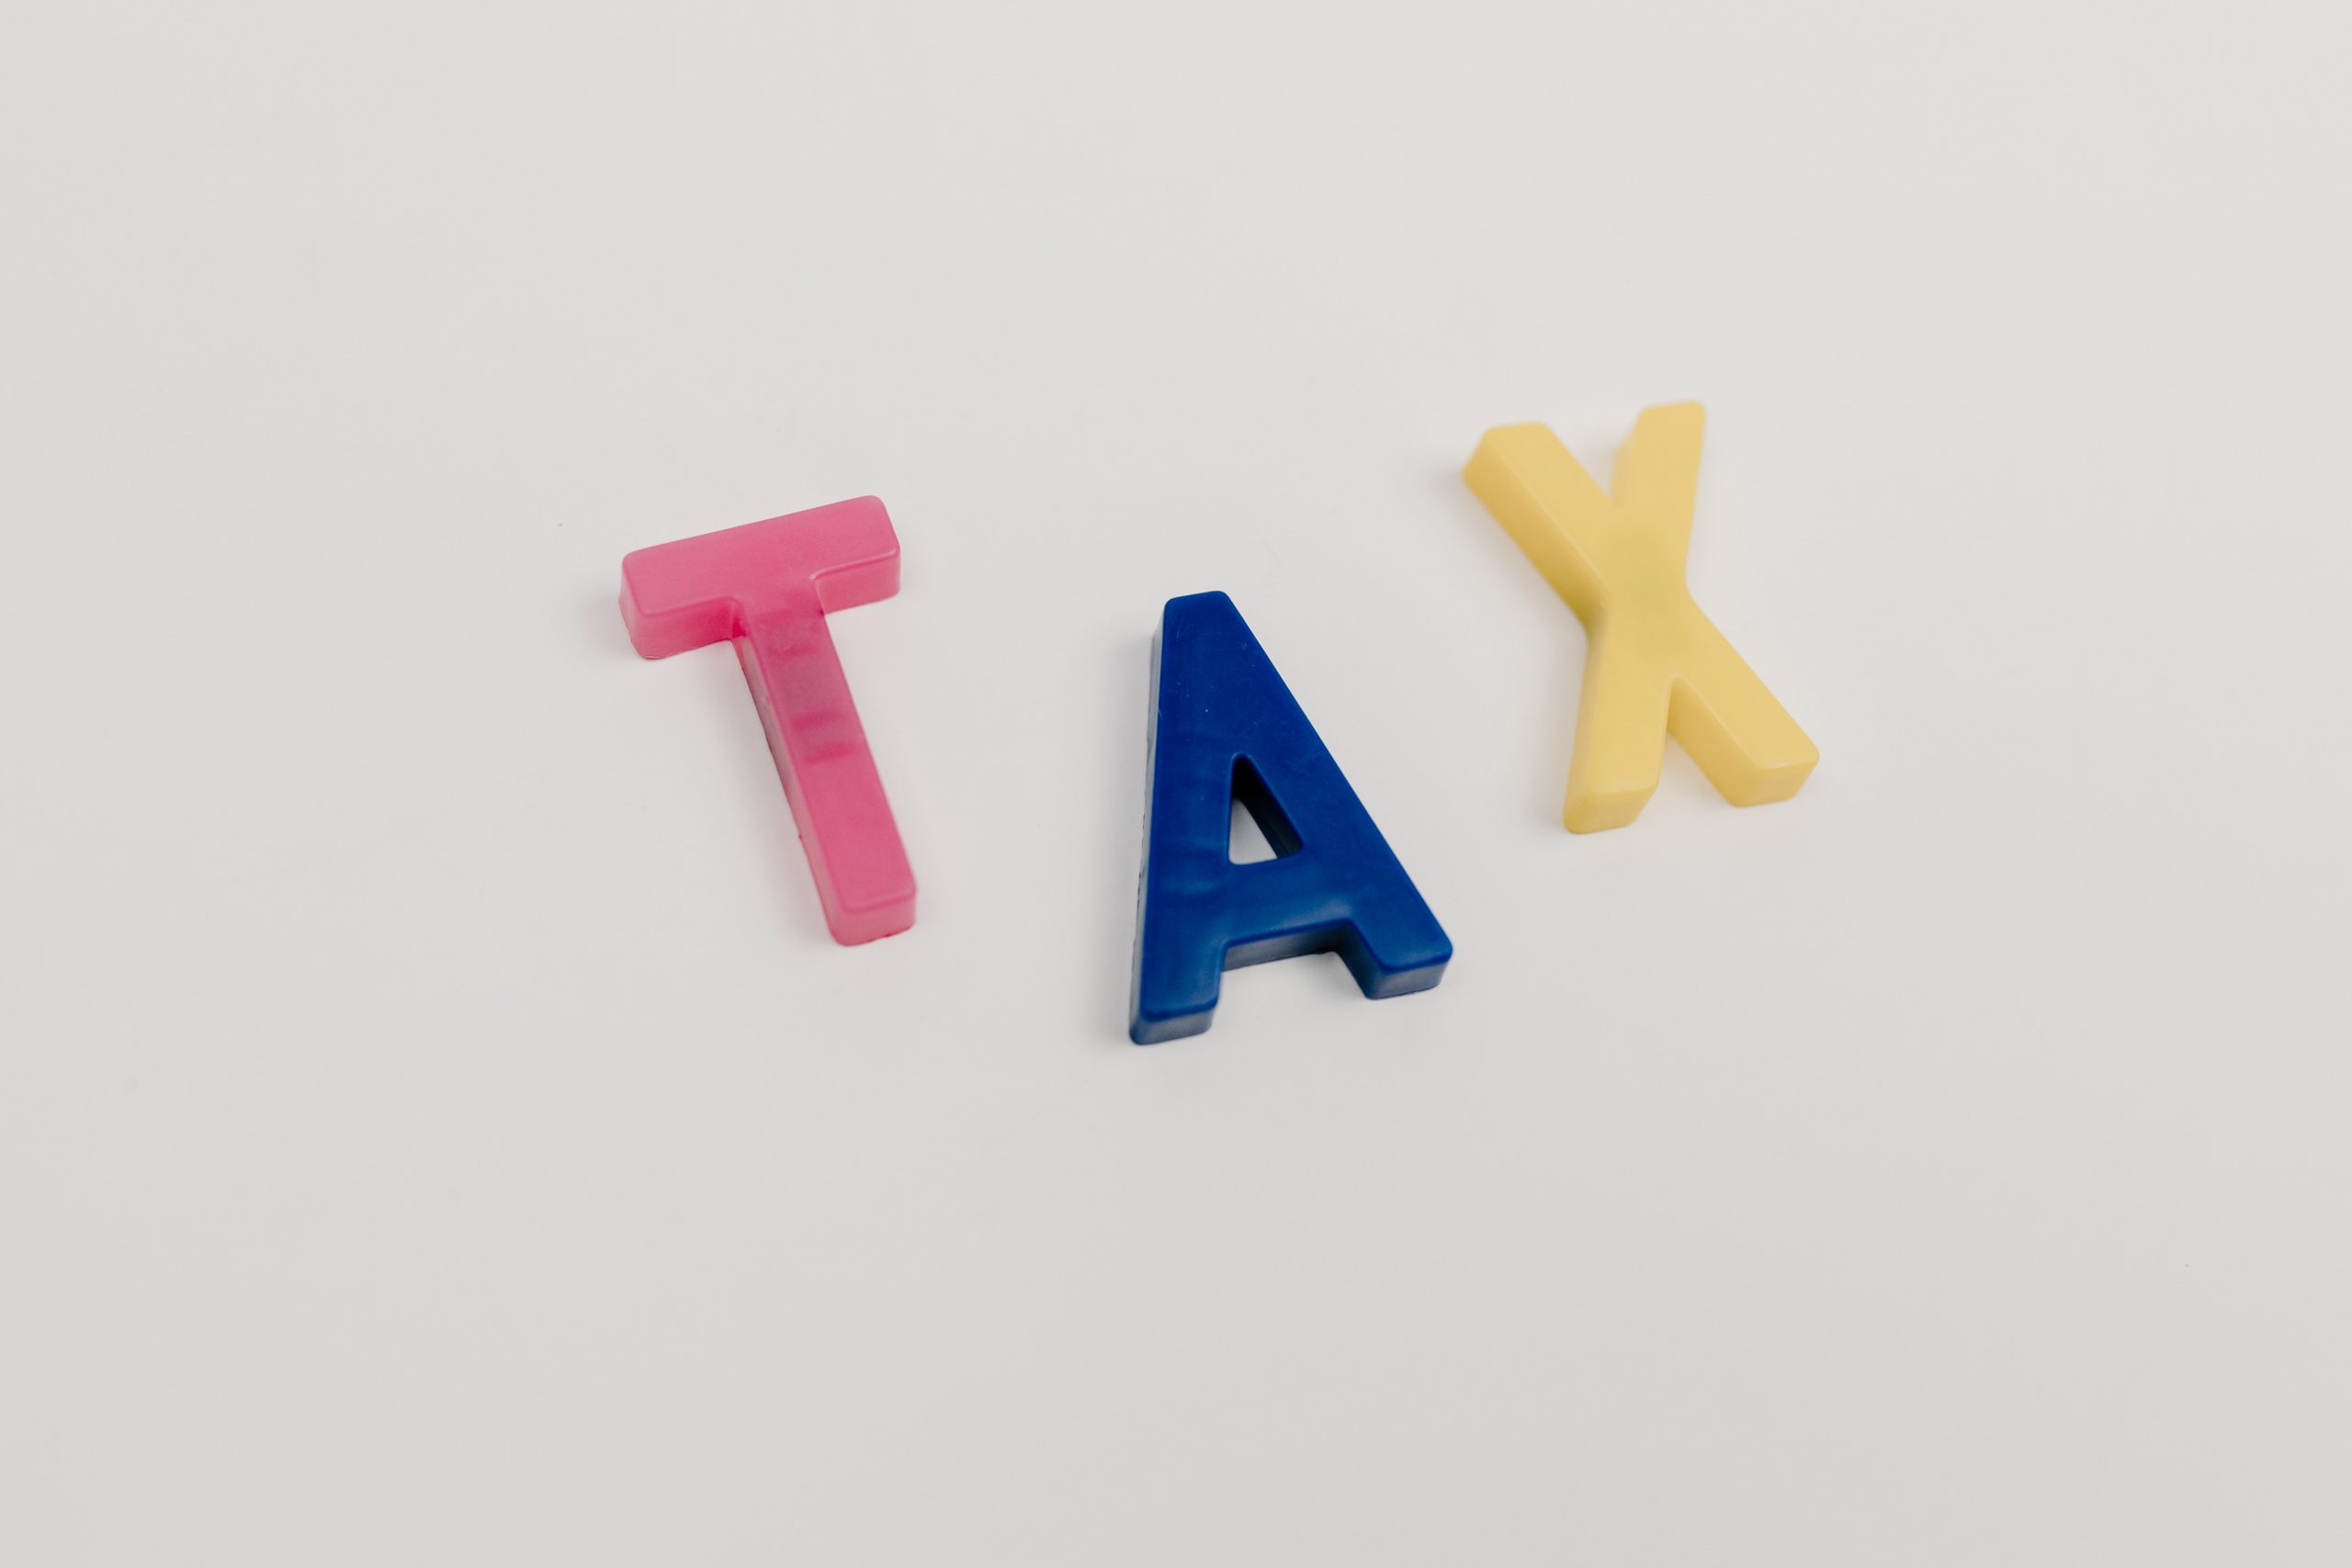 Image of 3 letters spelling the word tax